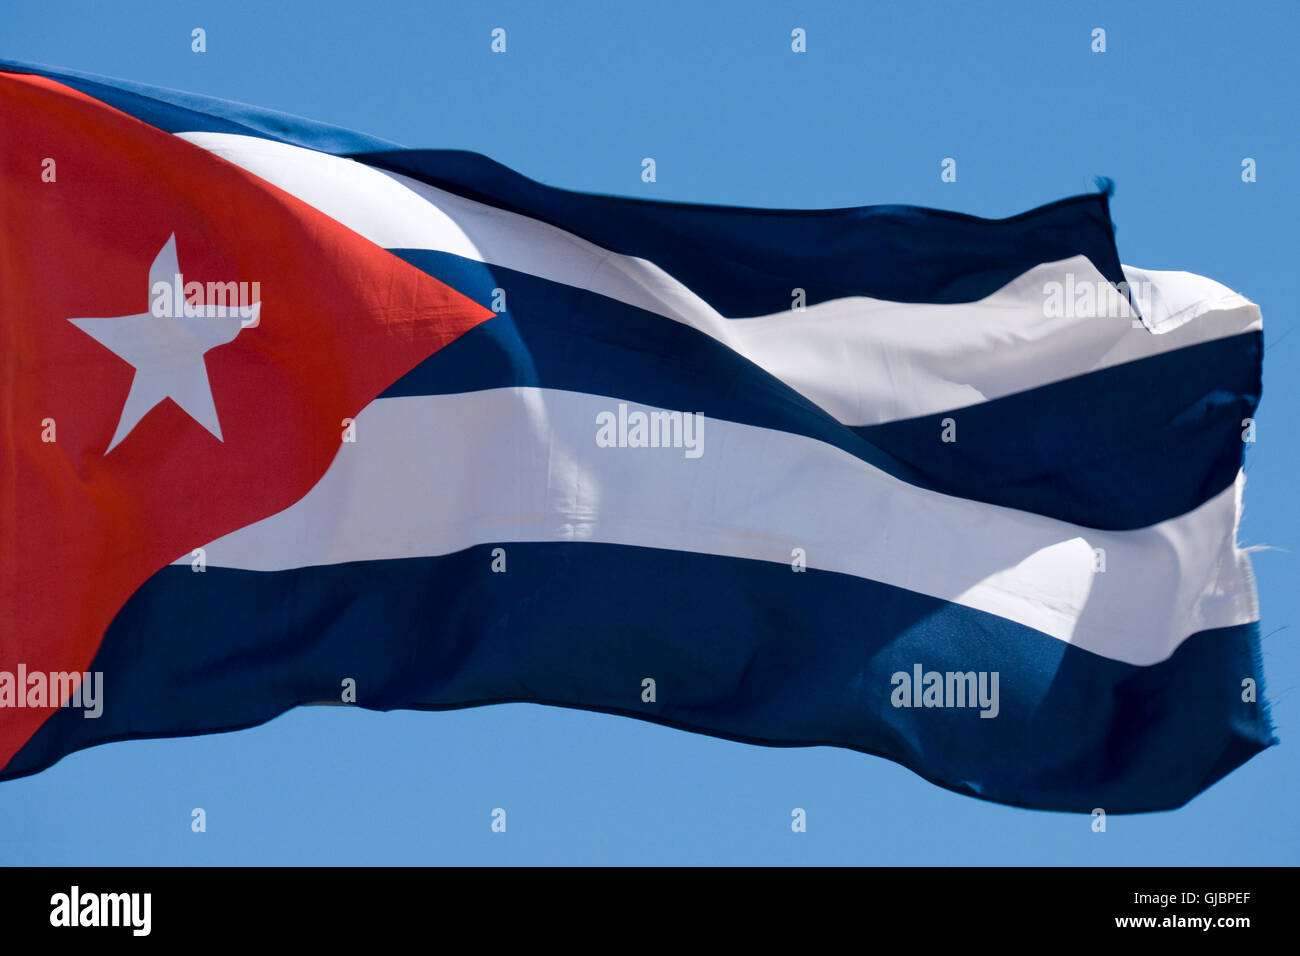 The Cuban flag flying against a bright blue sky. Stock Photo